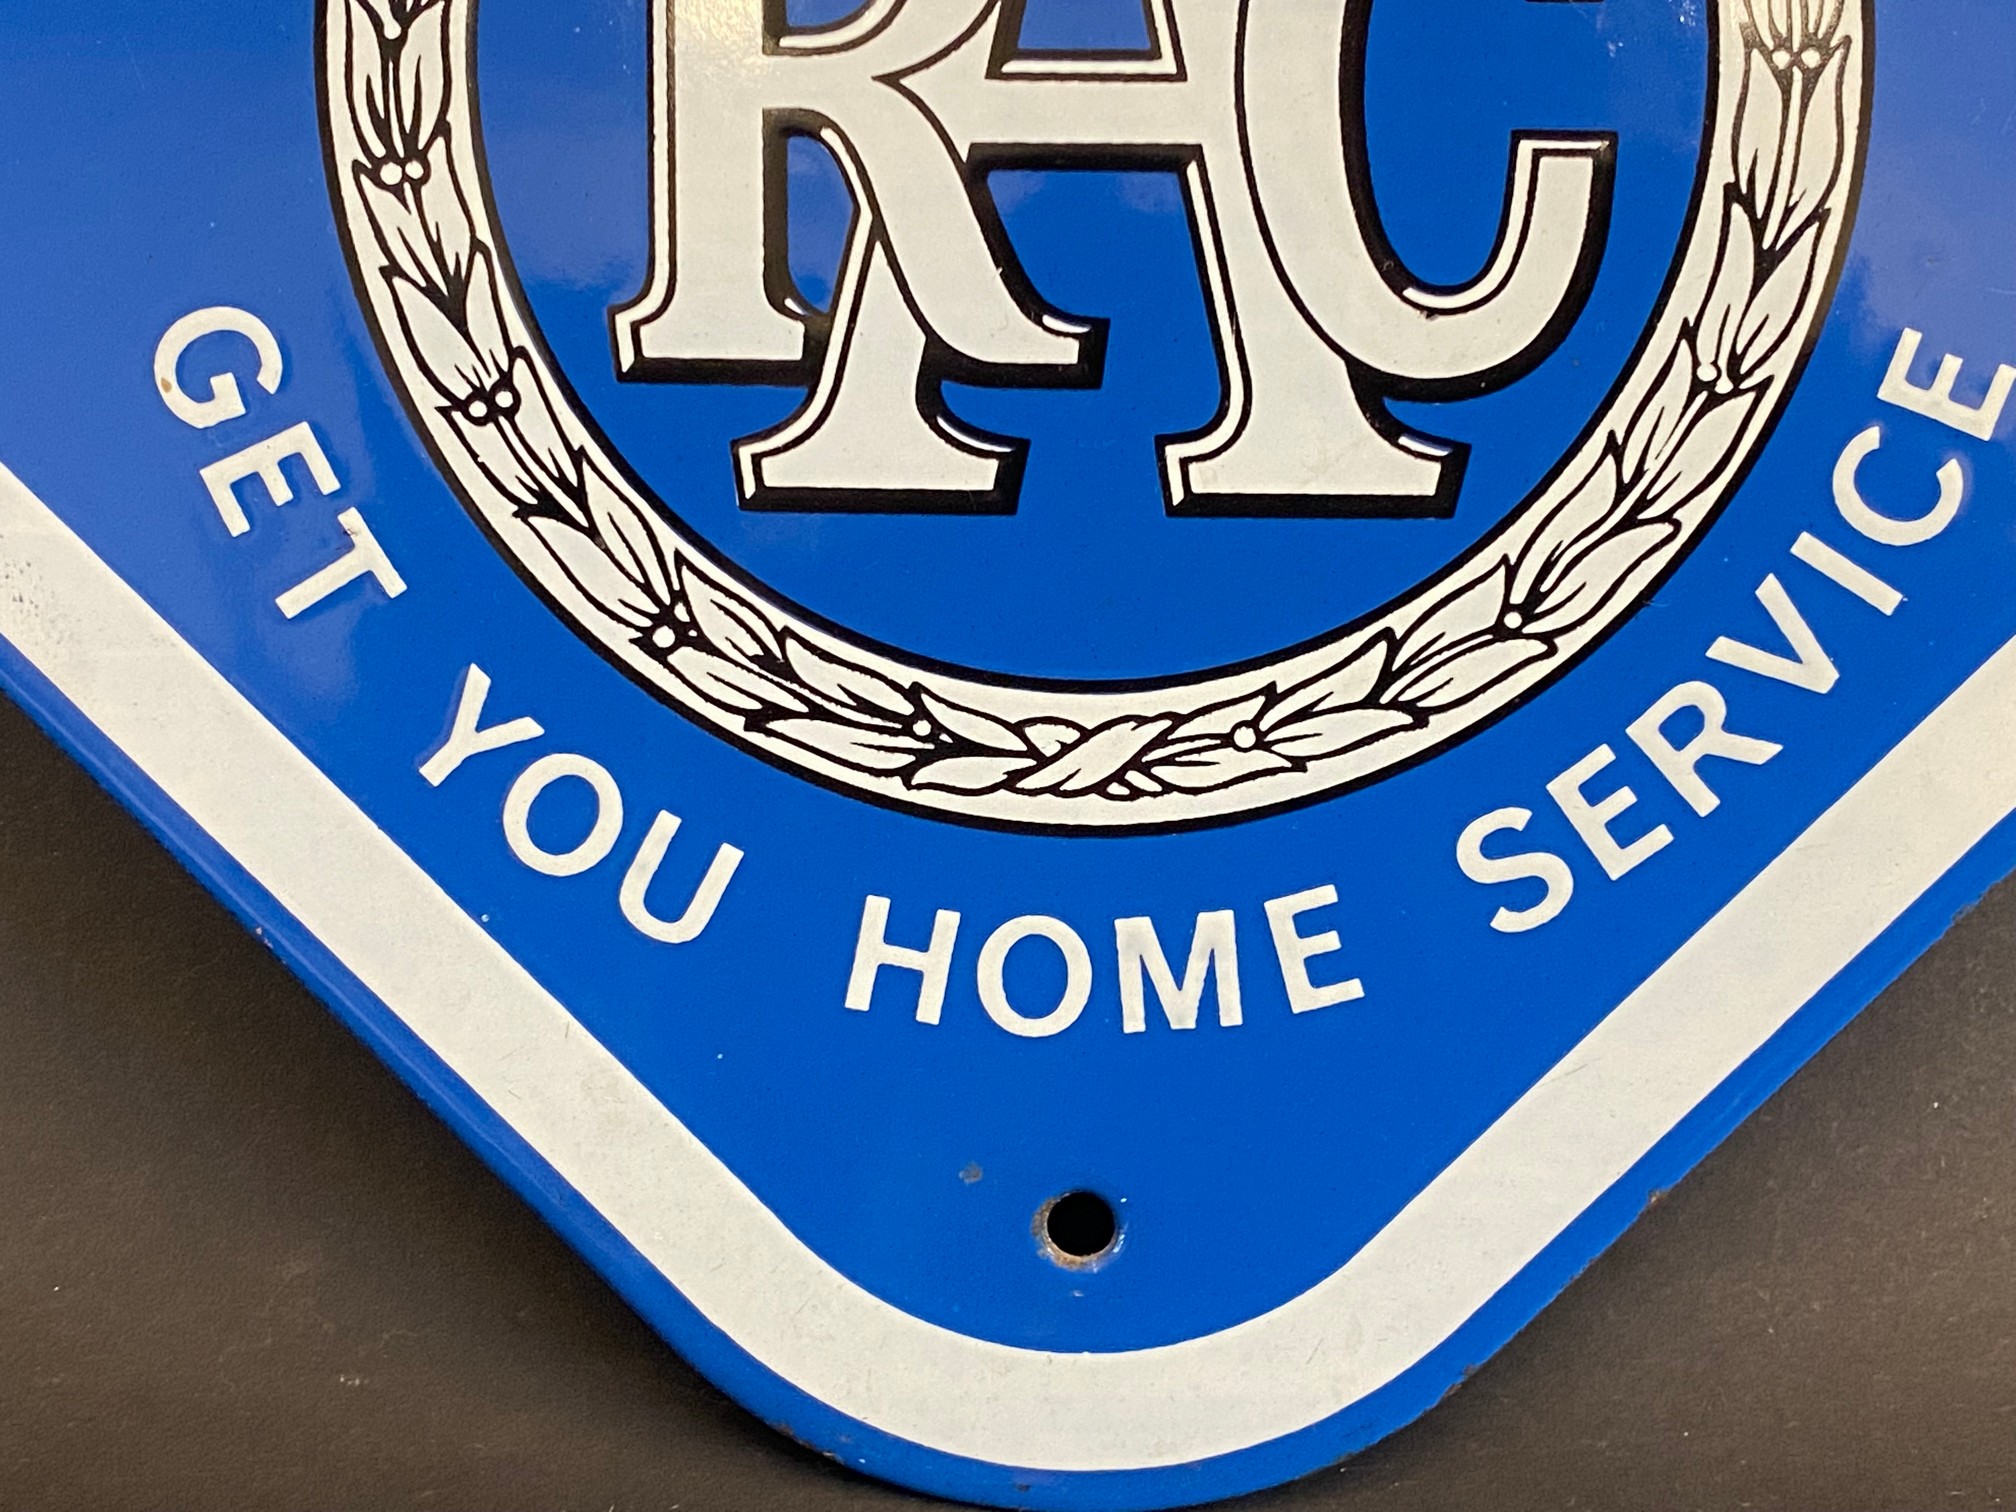 An RAC Get You Home Service lozenge shaped enamel sign, 10 1/2 x 10". - Image 2 of 3